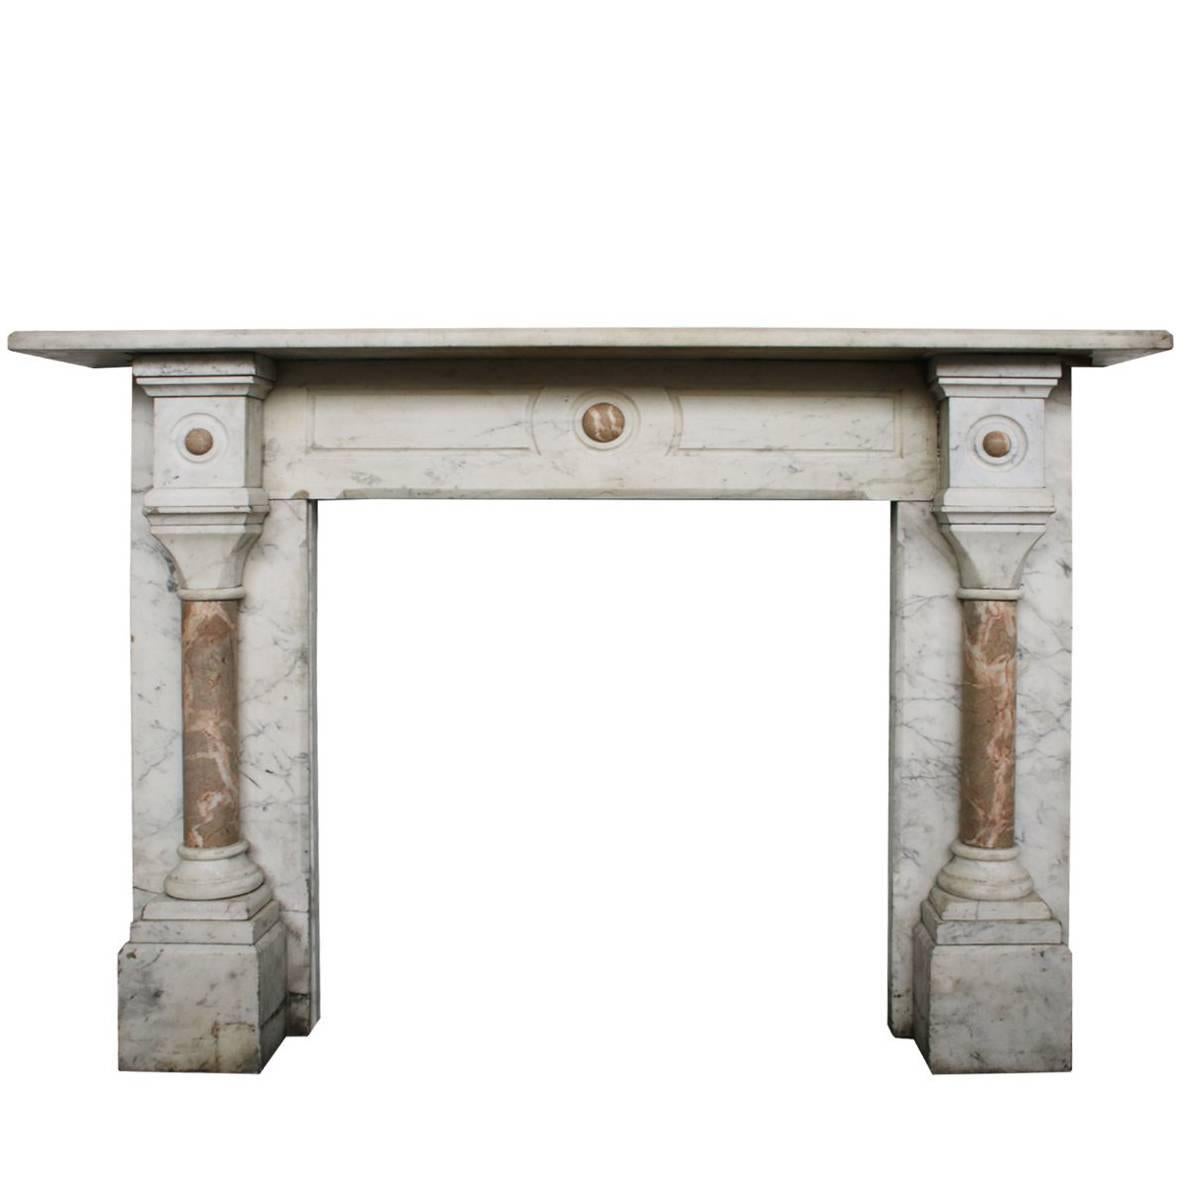 Large Antique Pillared Late Victorian Carrara Marble Fireplace Surround